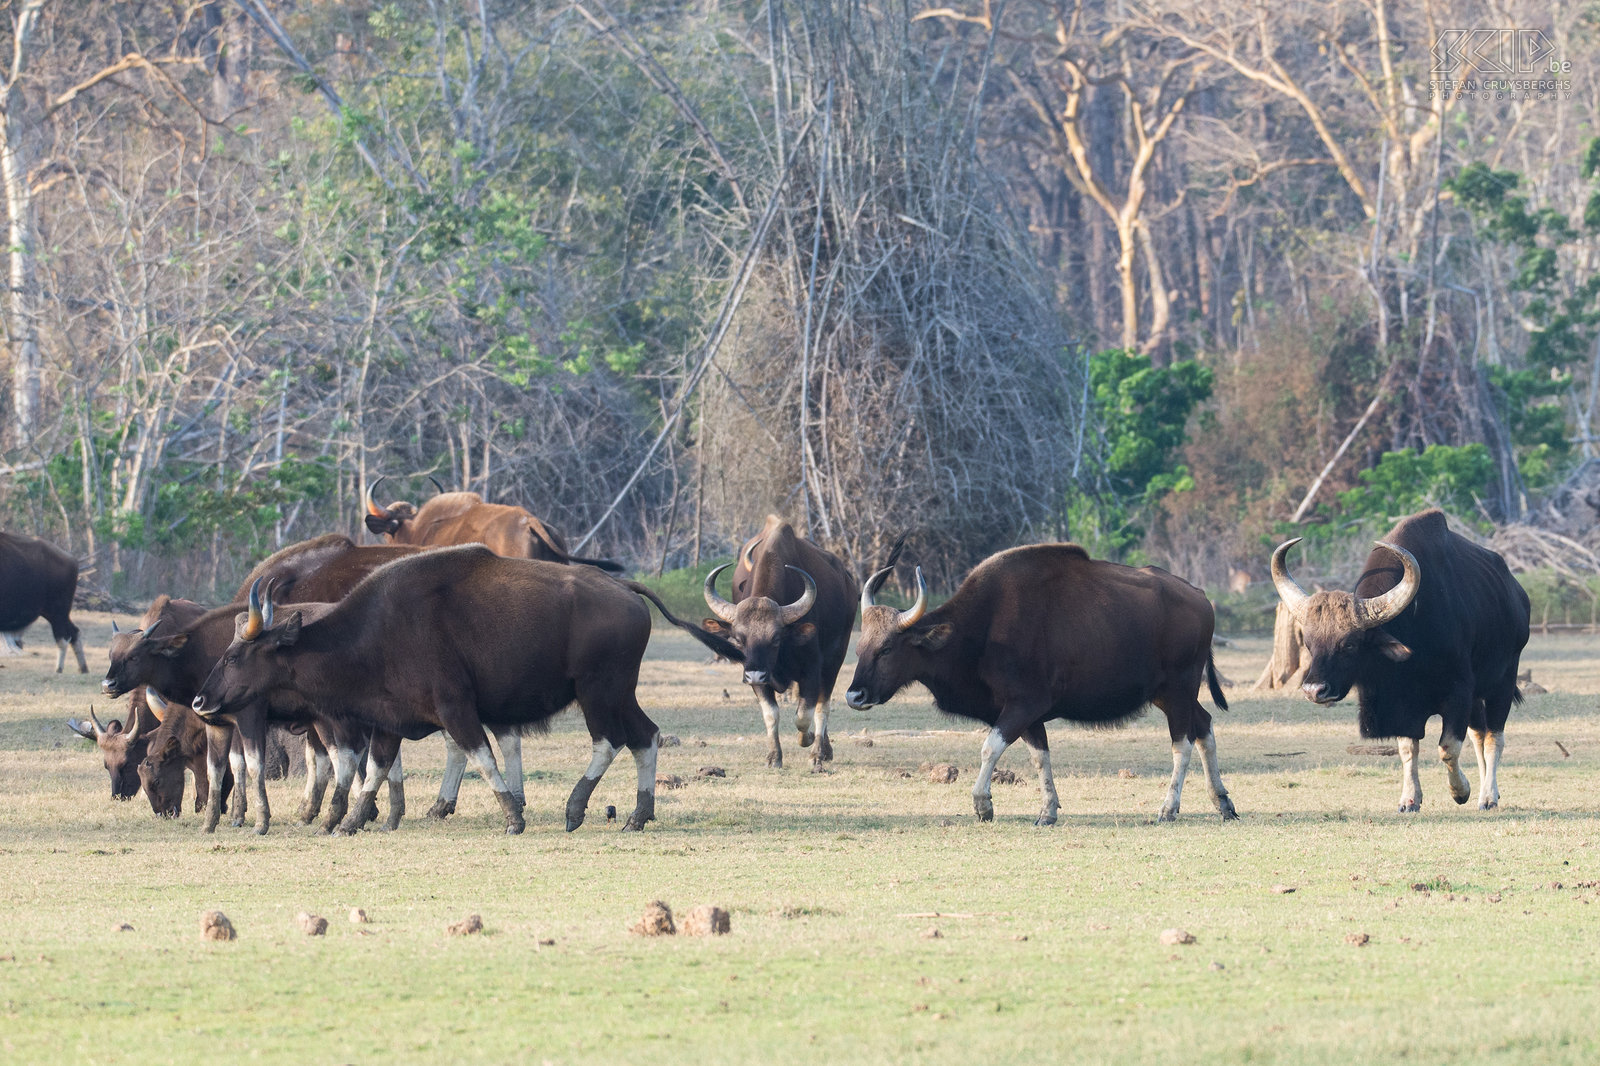 Kabini - Gaurs On the river banks we also encountered a large herd of gaurs. The gaur, also called Indian bison (Bos gaurus), is the largest bovine living in Asia.  Stefan Cruysberghs